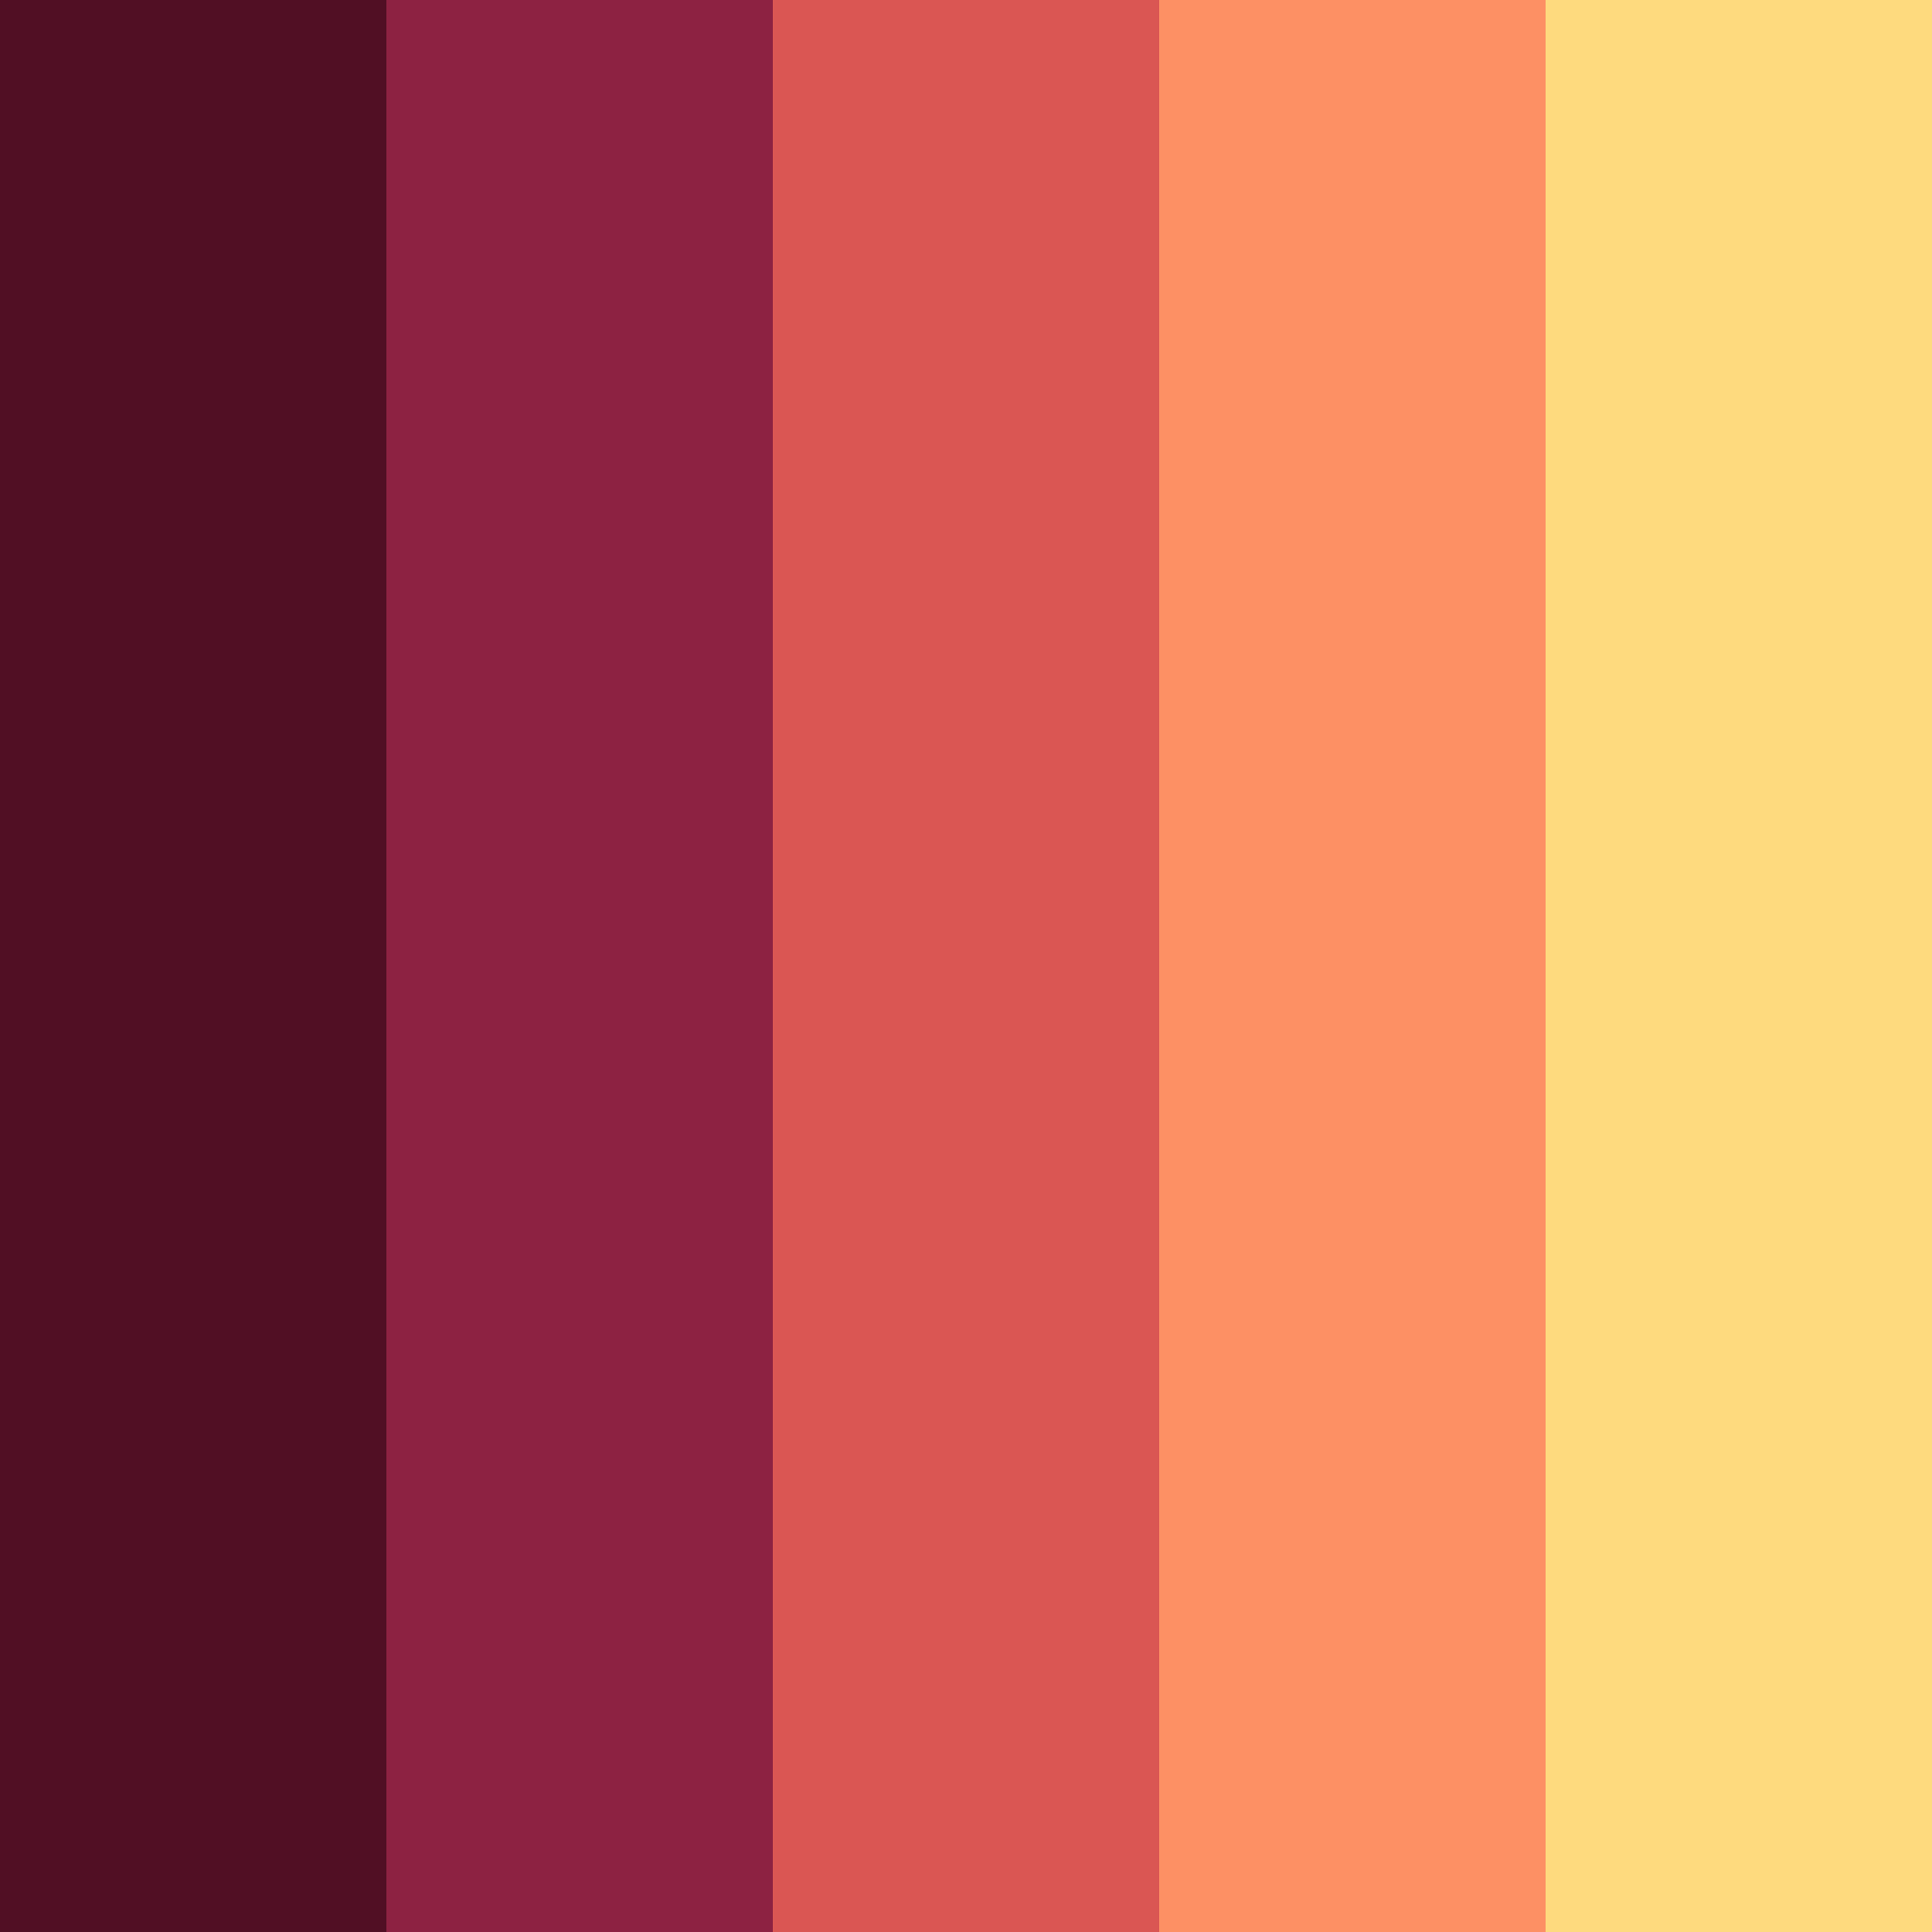 Flat Ui Color Swatches Aco Autumn Edition Web3canvas Coloring Wallpapers Download Free Images Wallpaper [coloring654.blogspot.com]